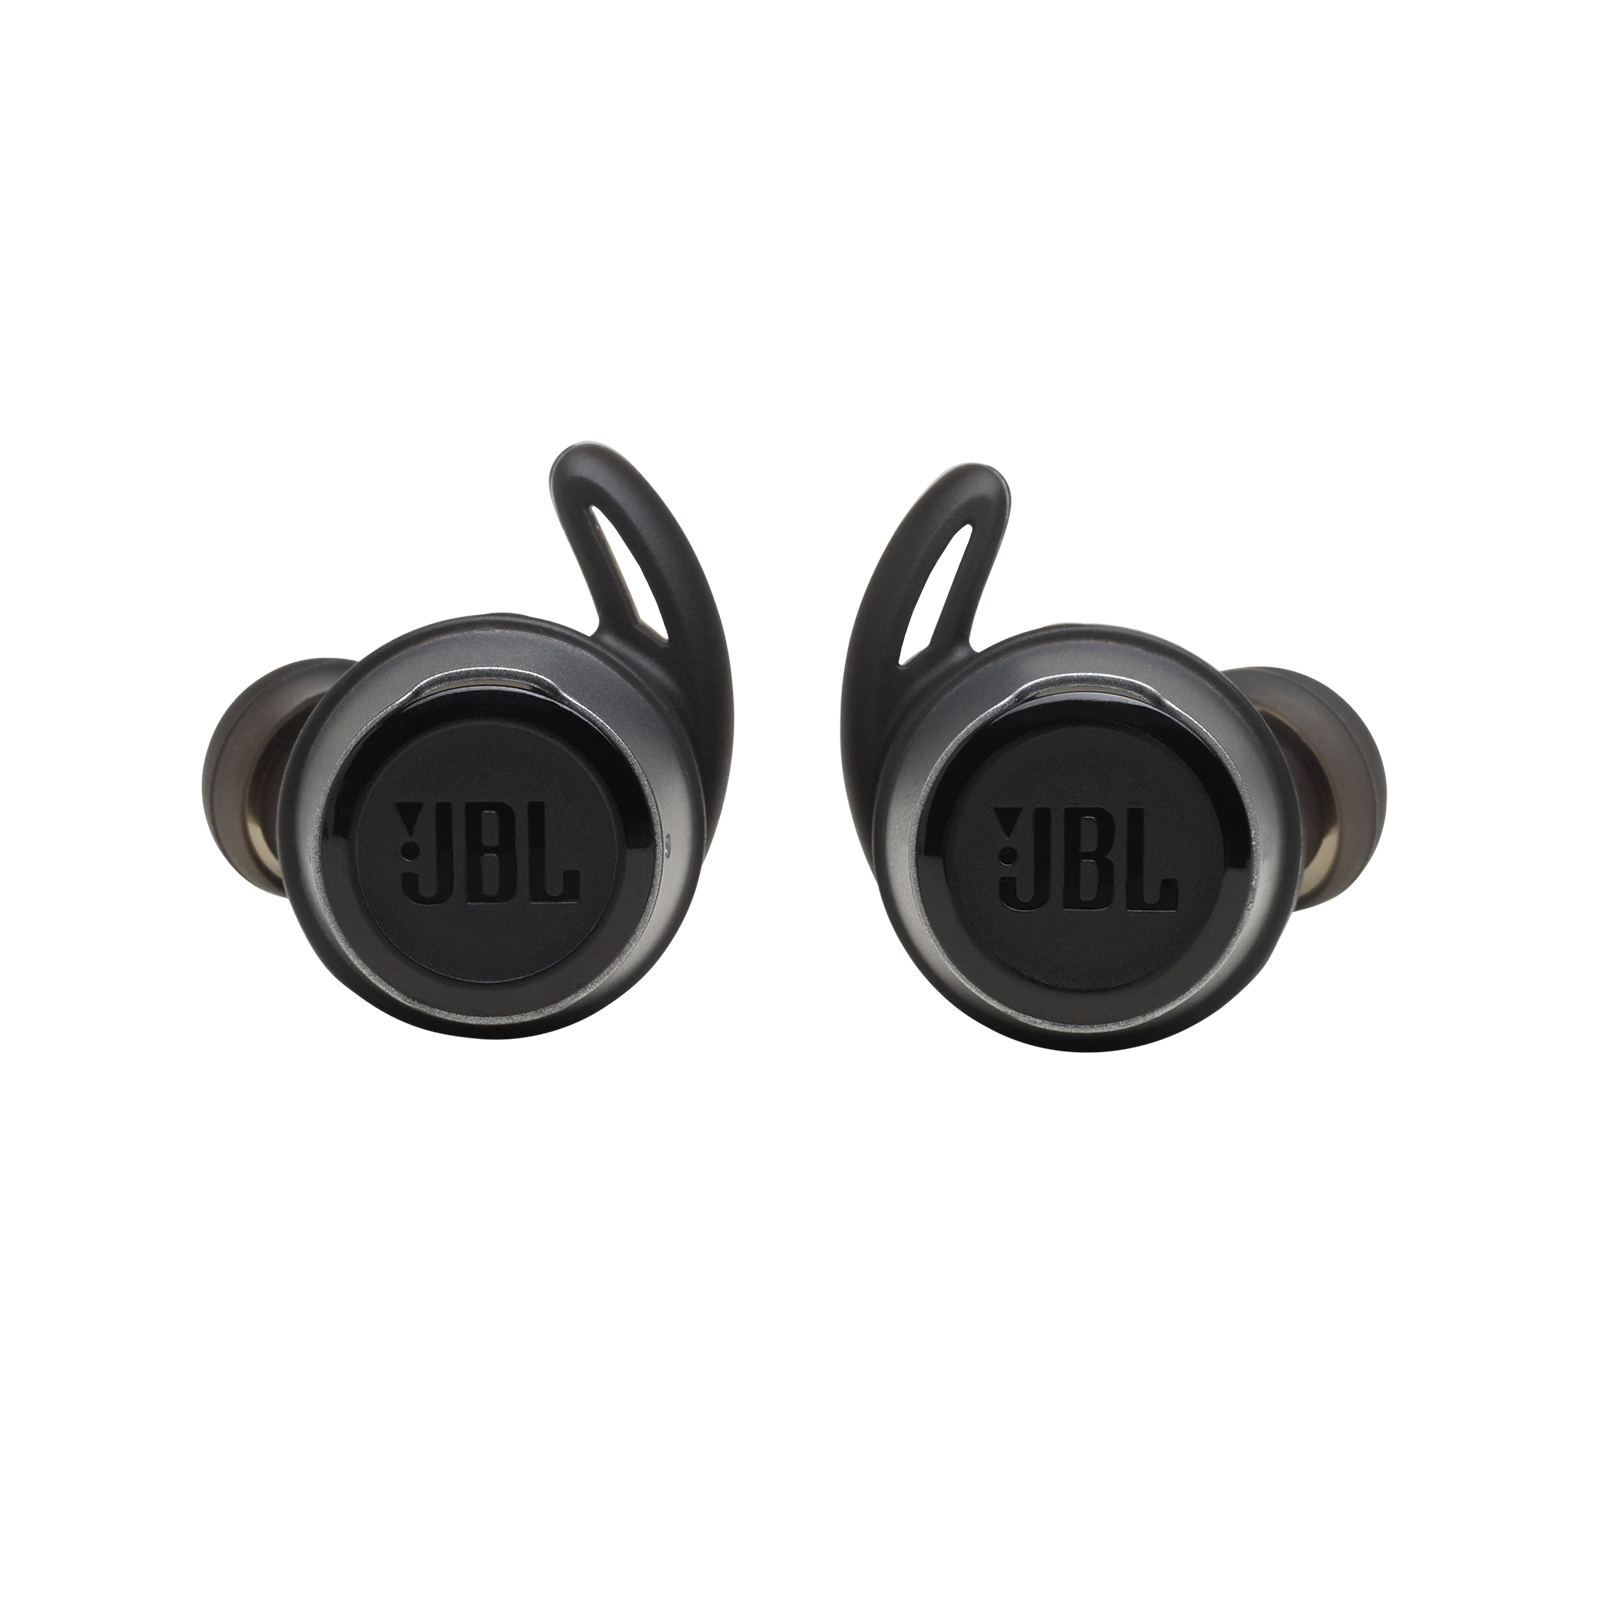 JBL REFLECT FLOW replacement kit - Black - Ear buds, ear tips and enhancers - Hero